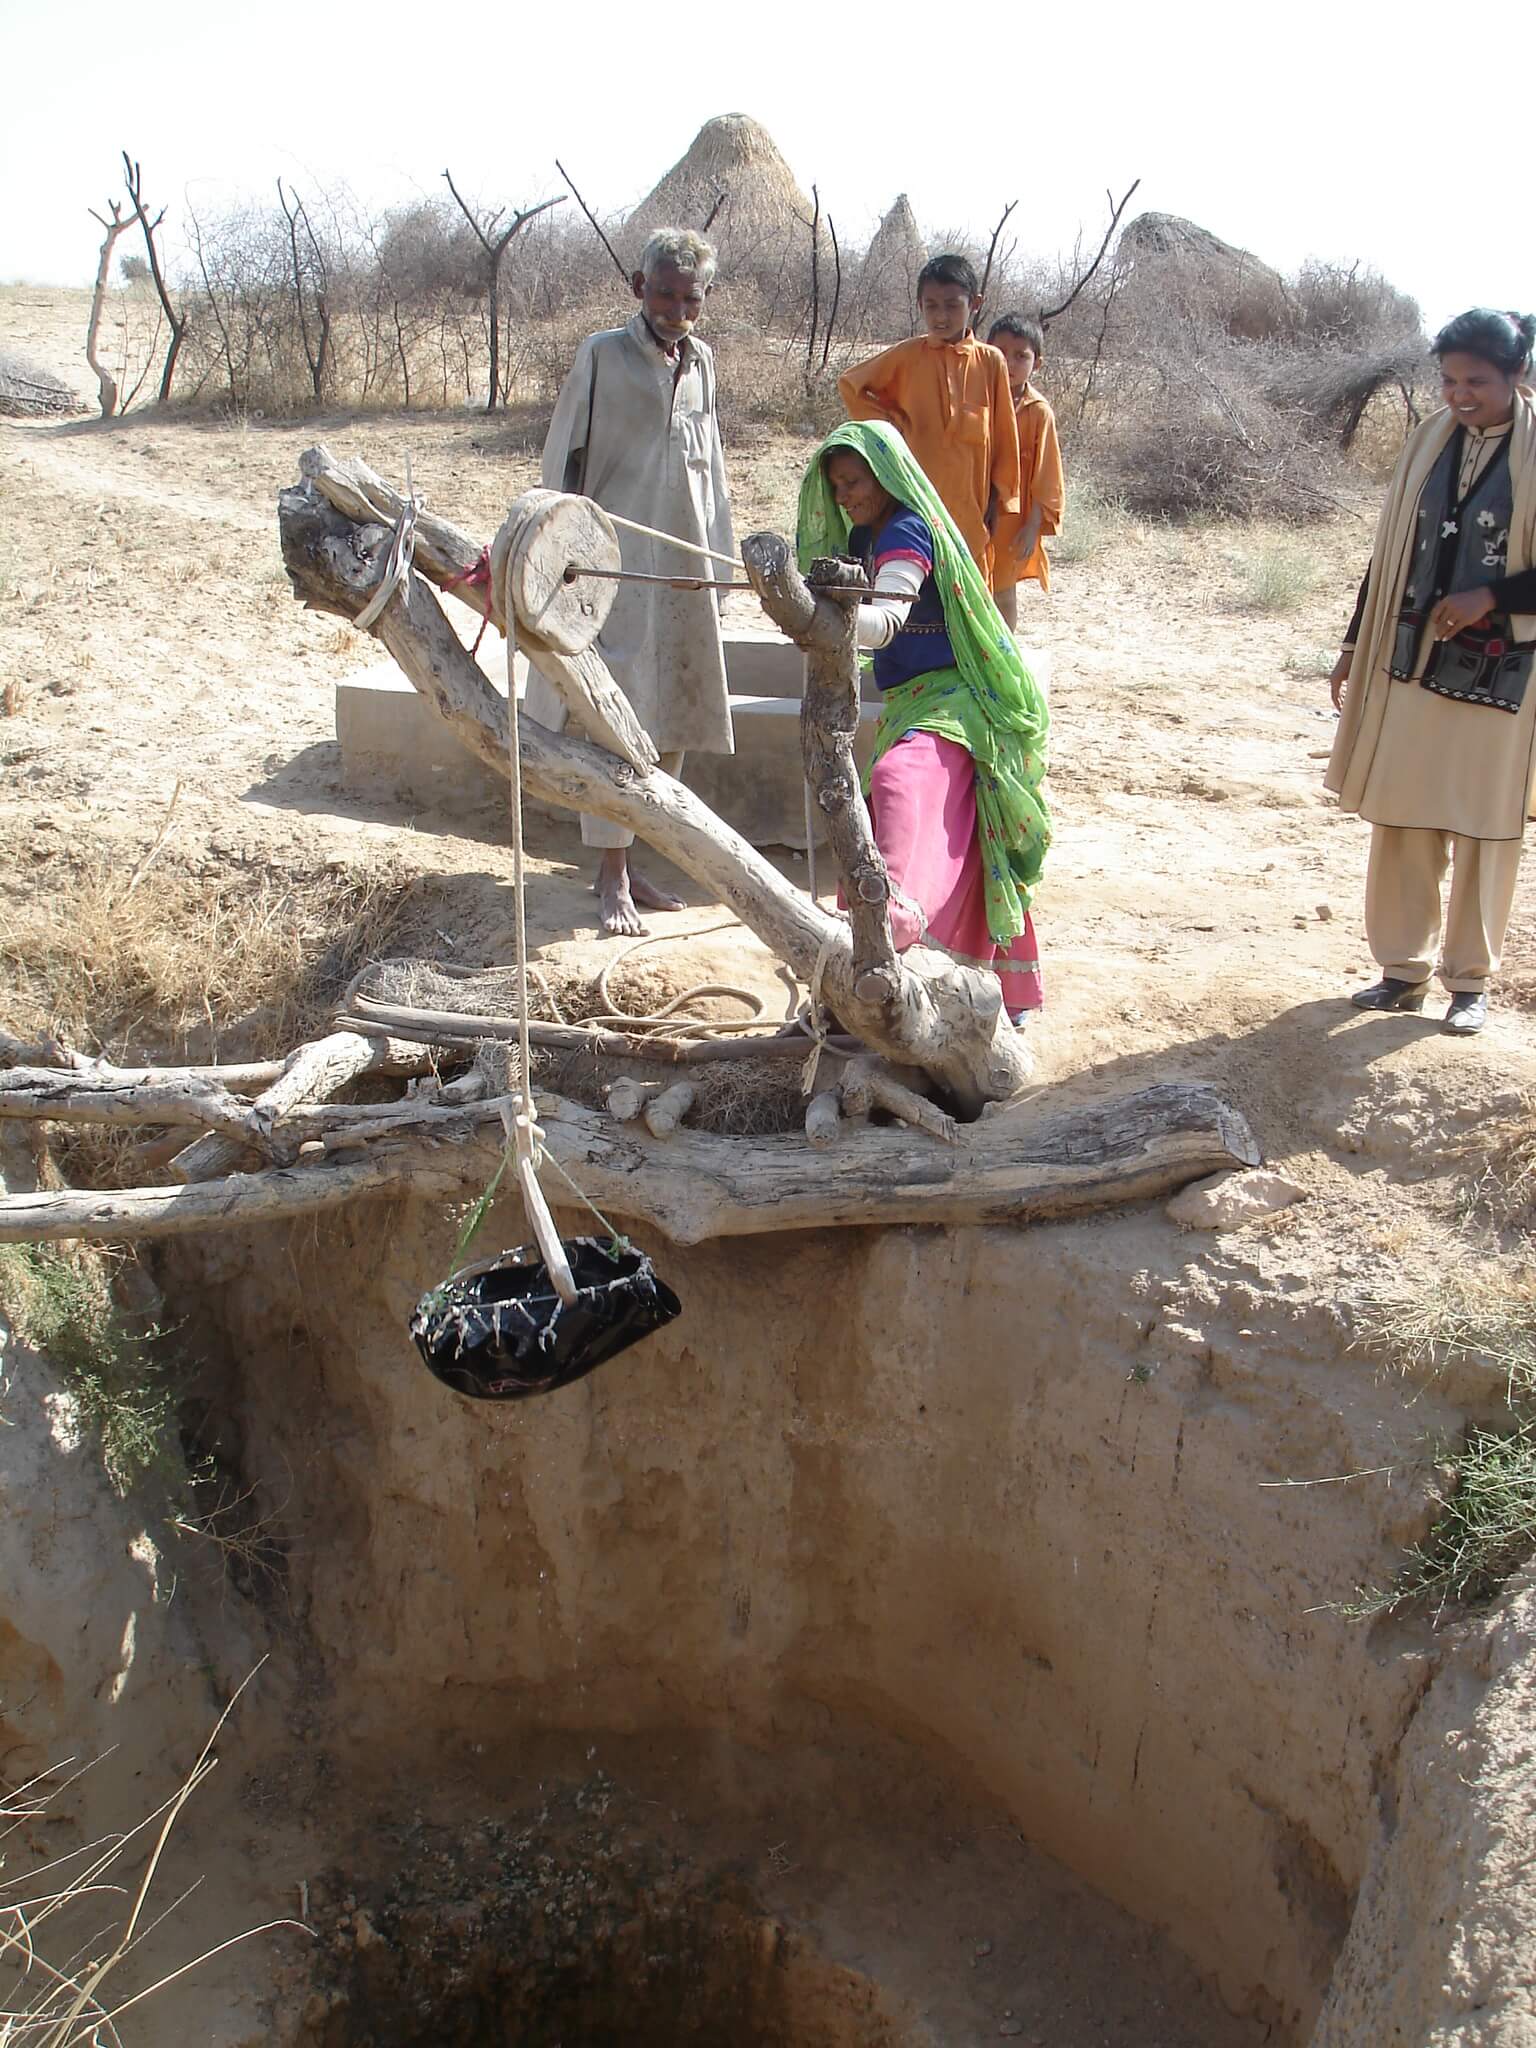 A woman drawing water from well in Pakistan. Photo: St Columbans Mission Society